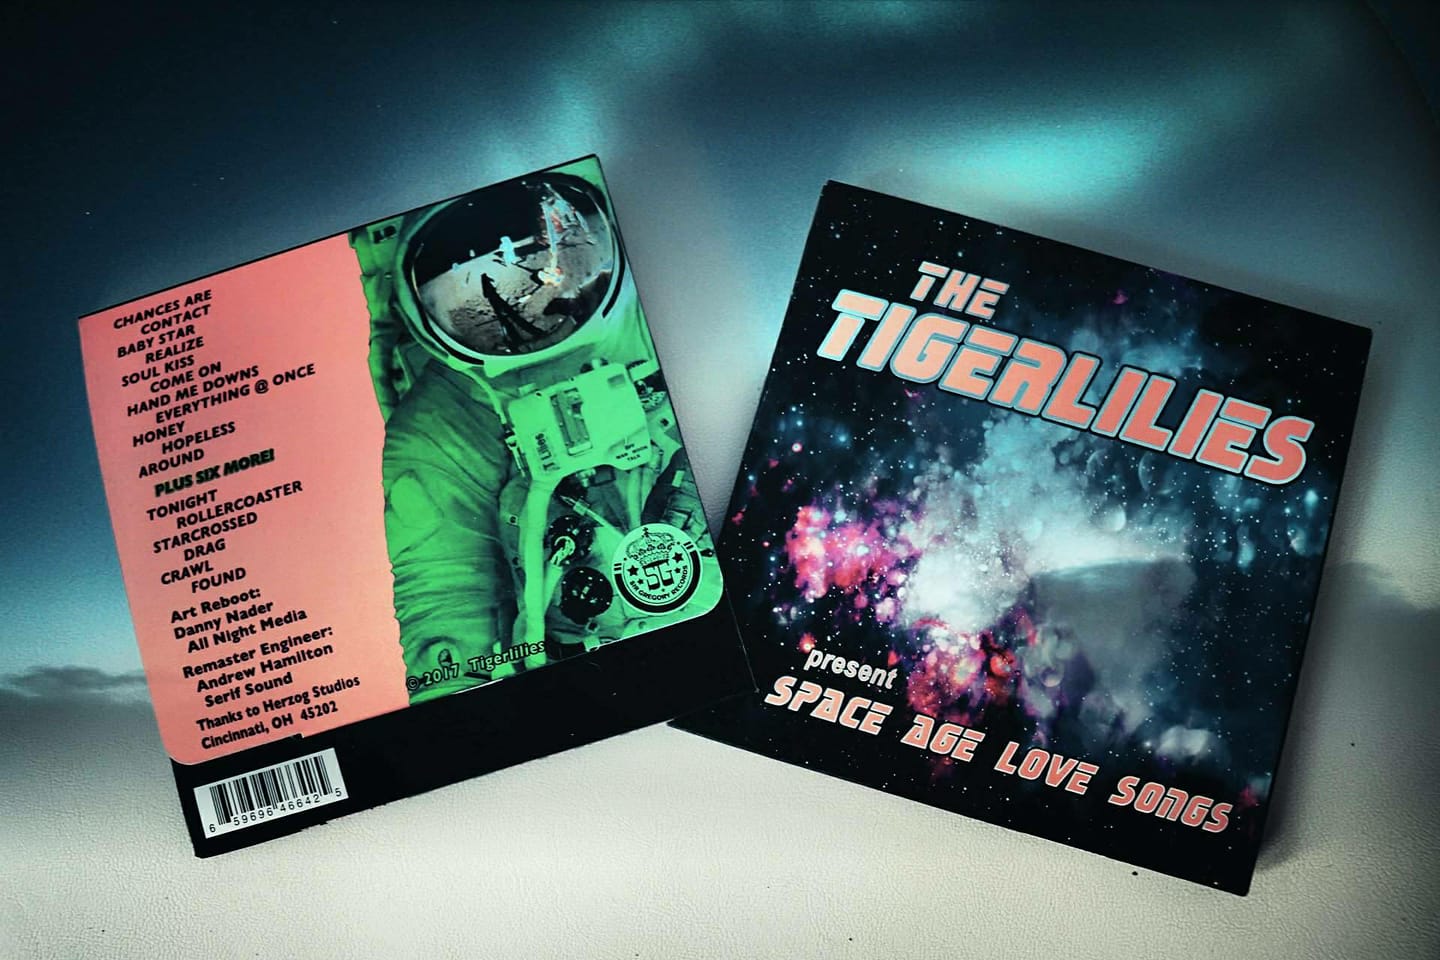 The Tigerlilies' Space Age Love Songs